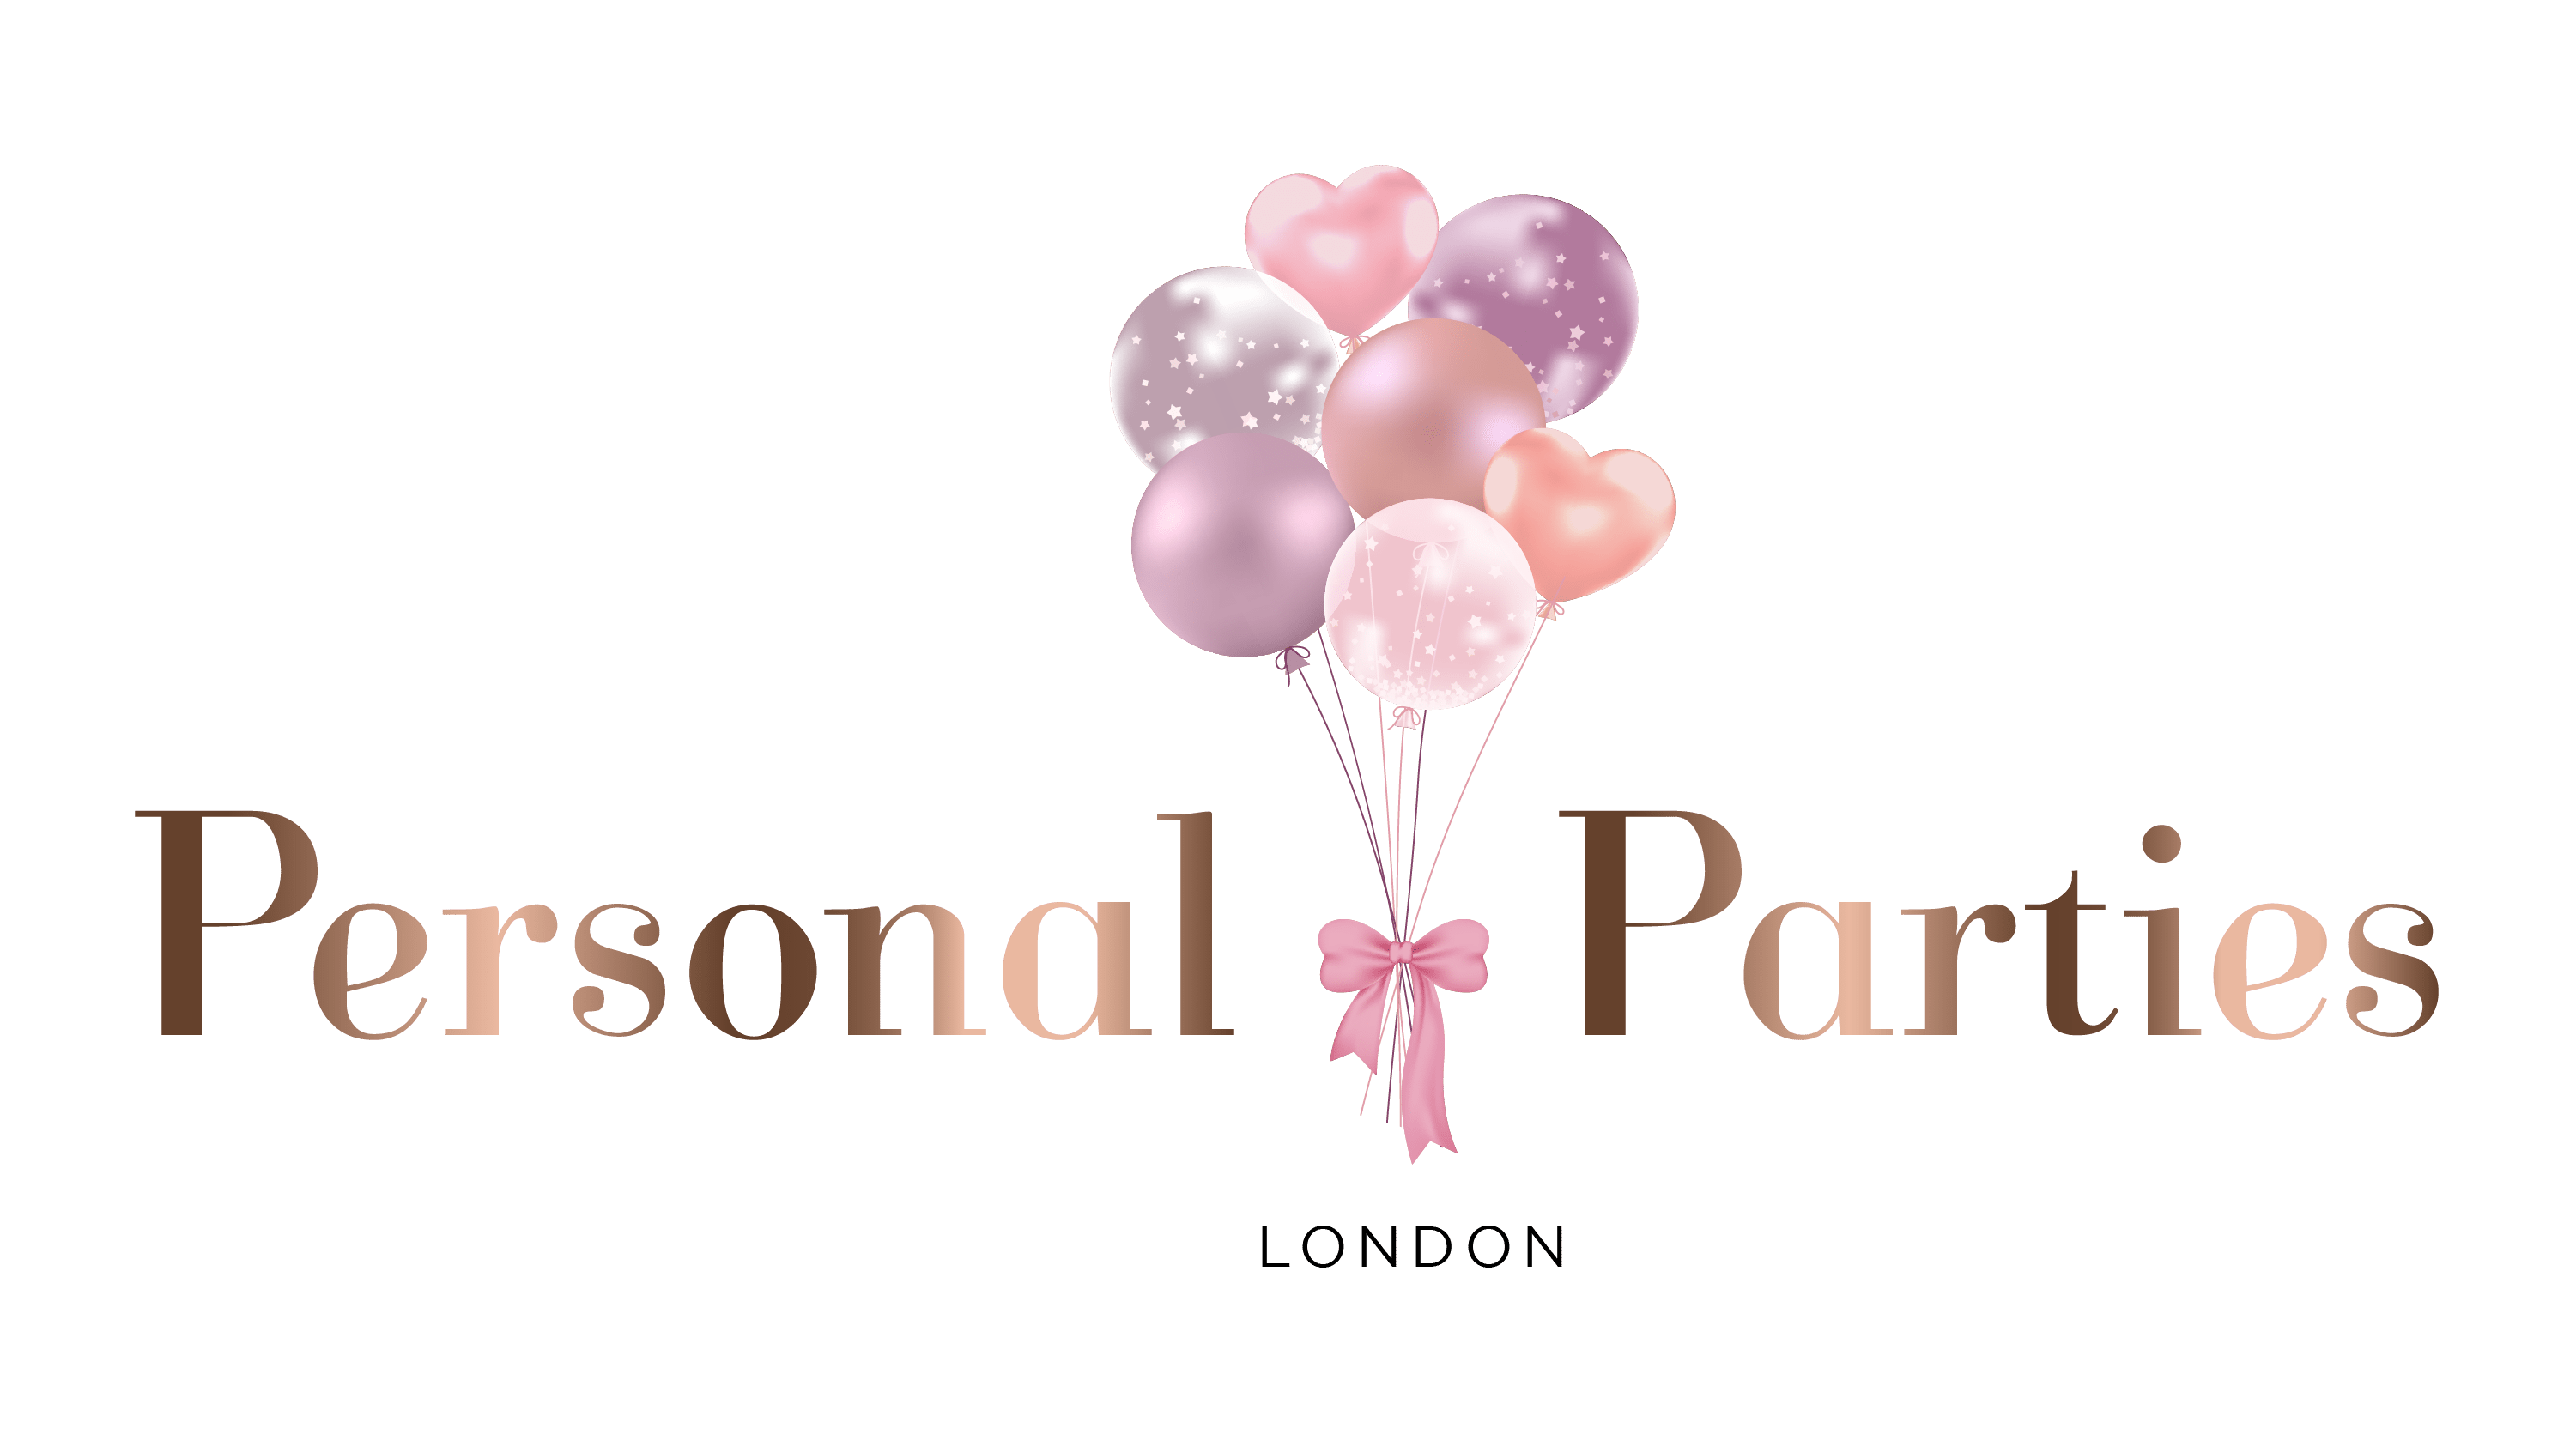 Personal parties London